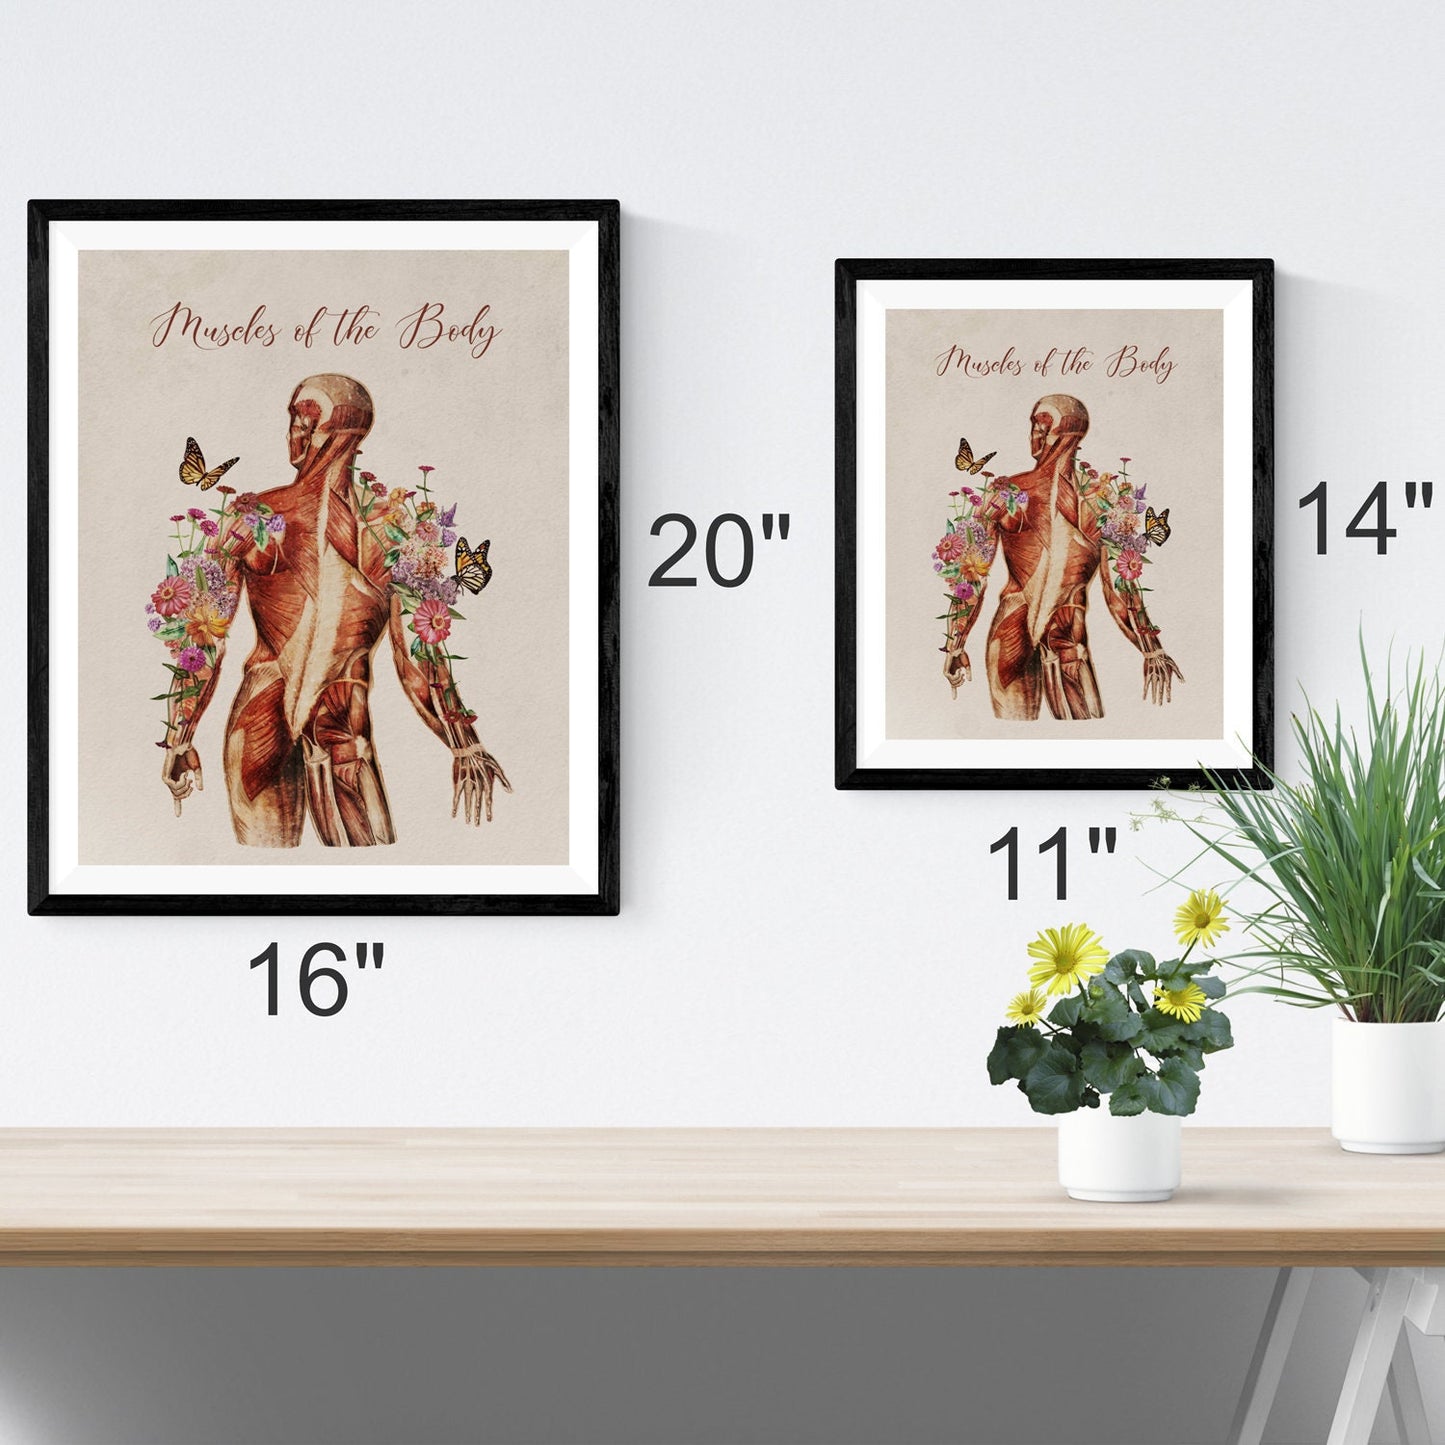 Vintage "Muscles of the Body" Muscular Picture for Massage Therapist Office or Home (Several Choices)